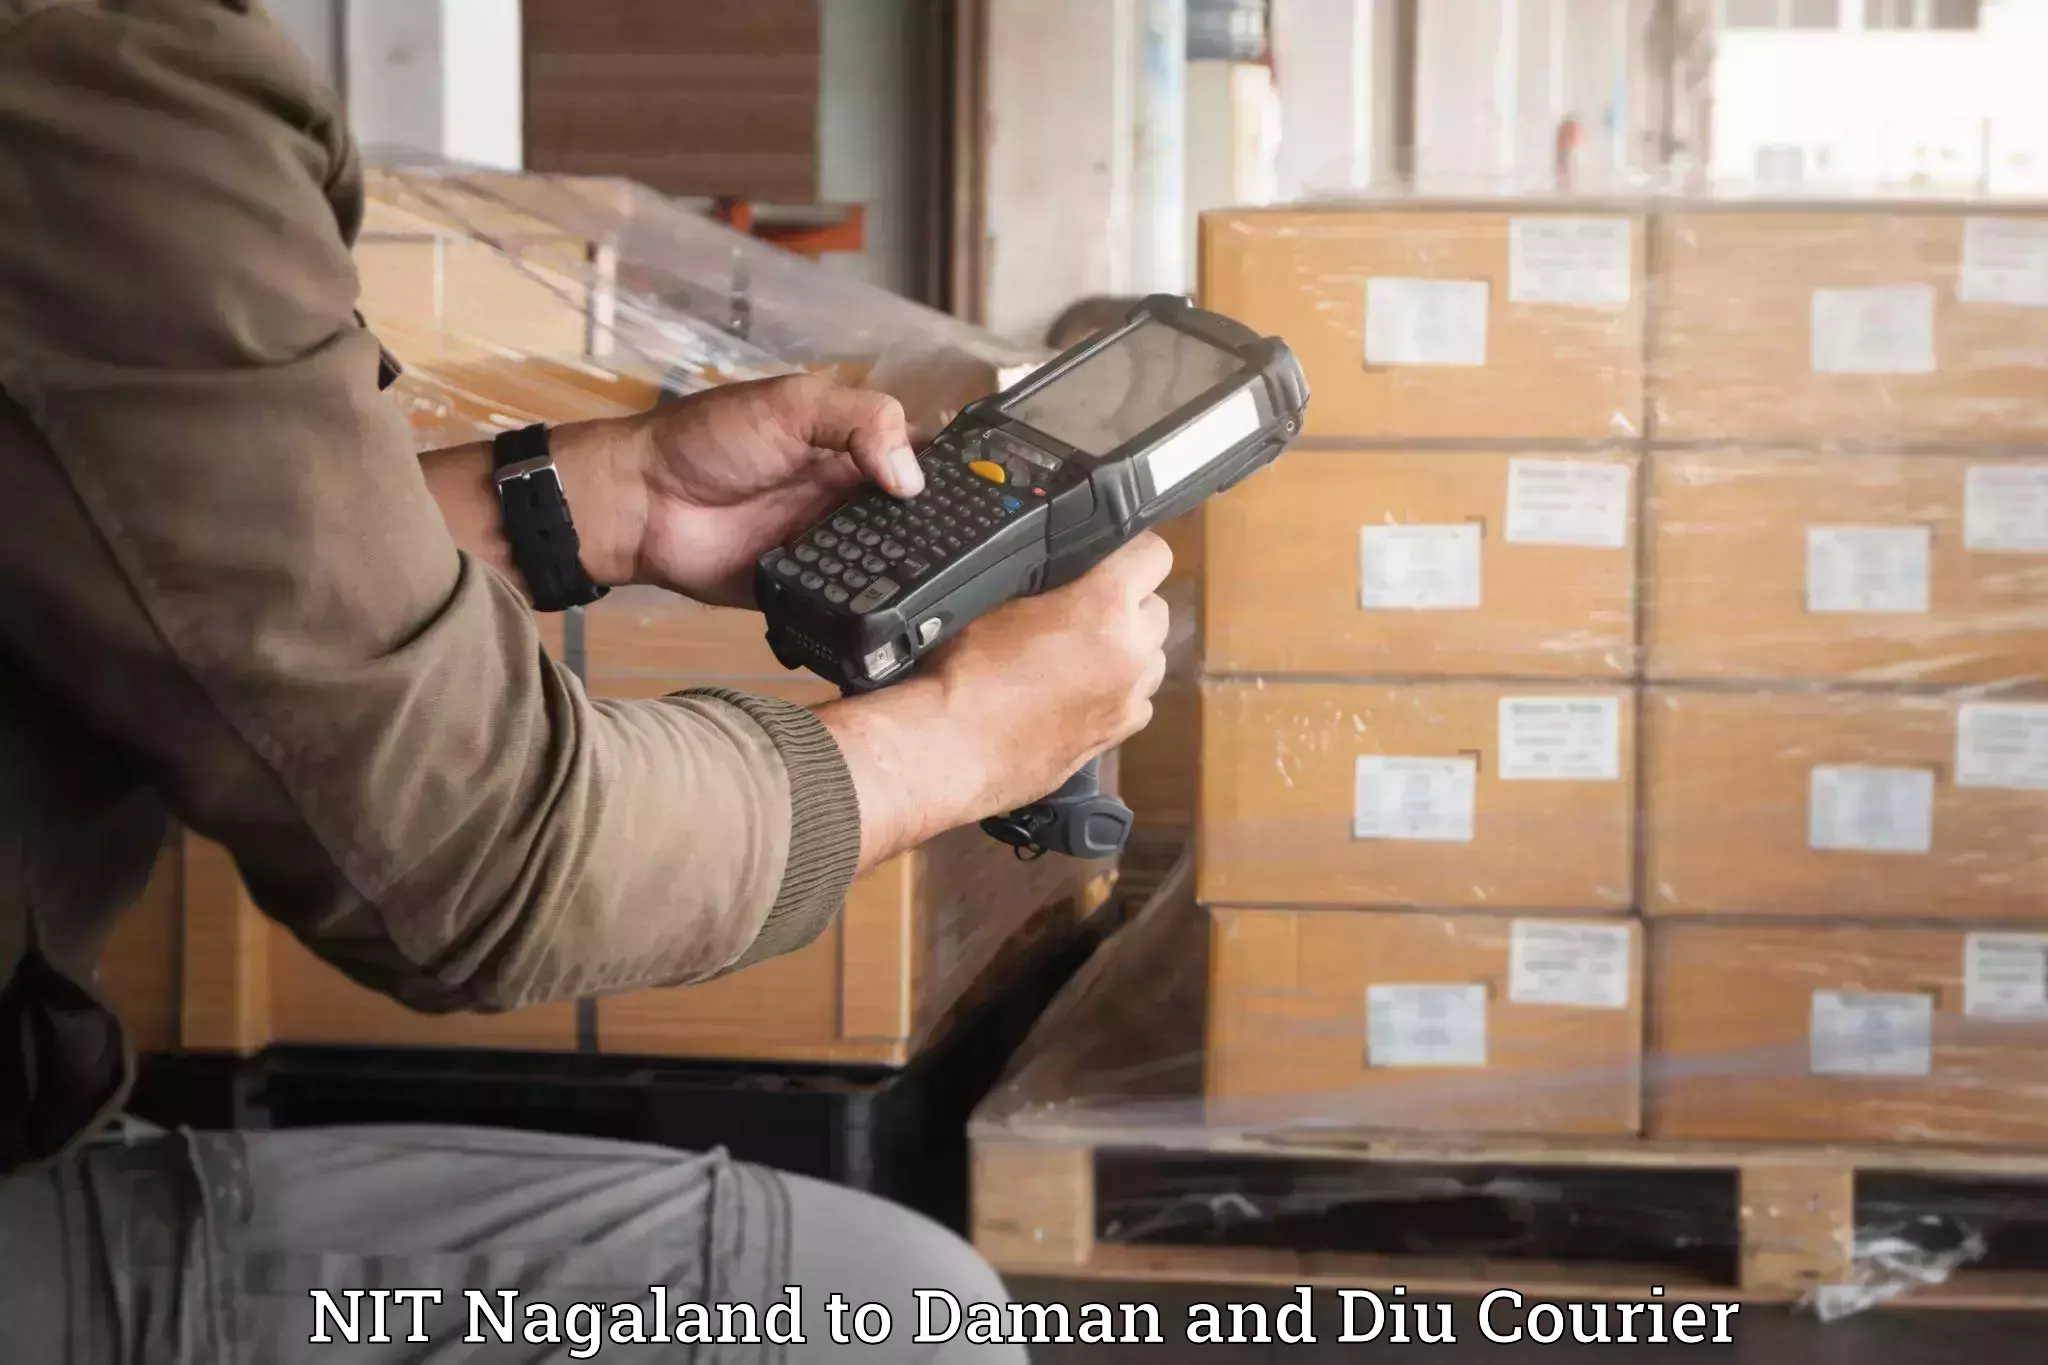 Professional packing services NIT Nagaland to Diu